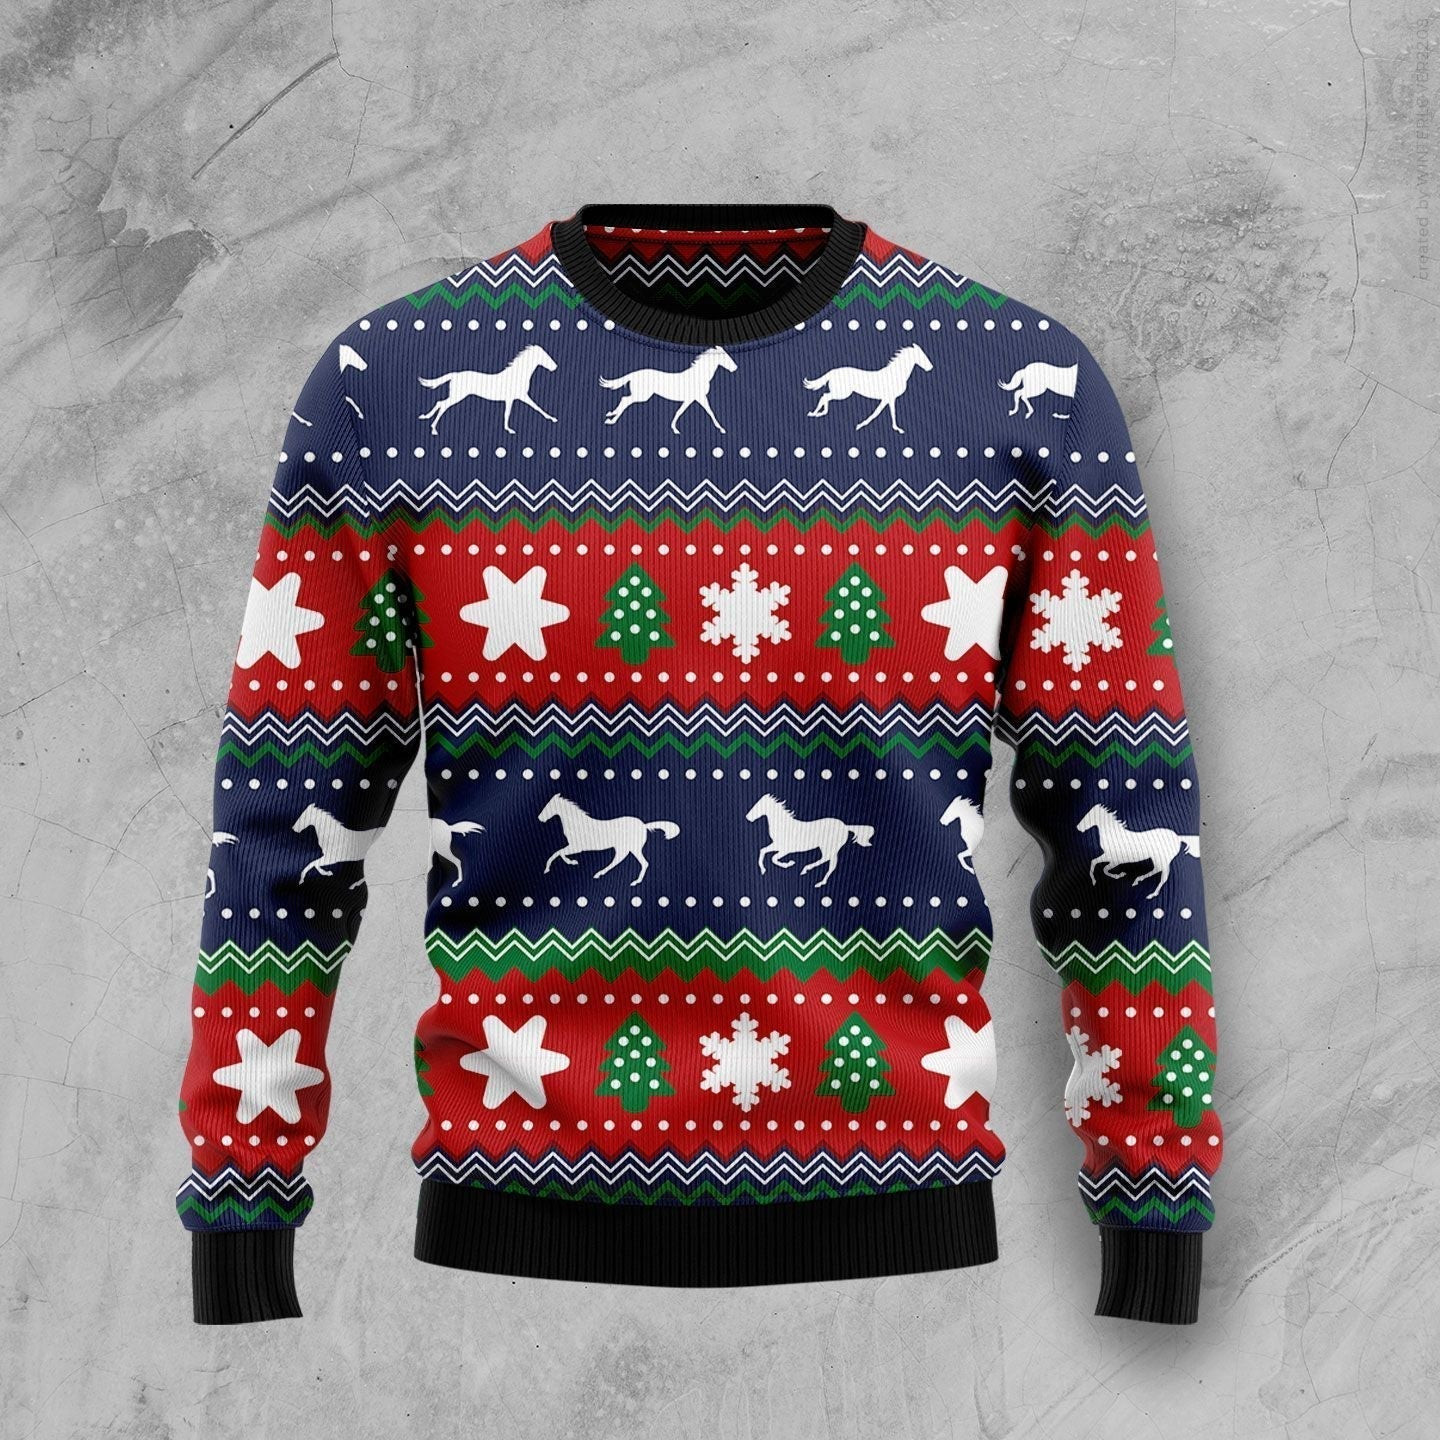 Amazing Horses Ugly Christmas Sweater Ugly Sweater For Men Women, Holiday Sweater